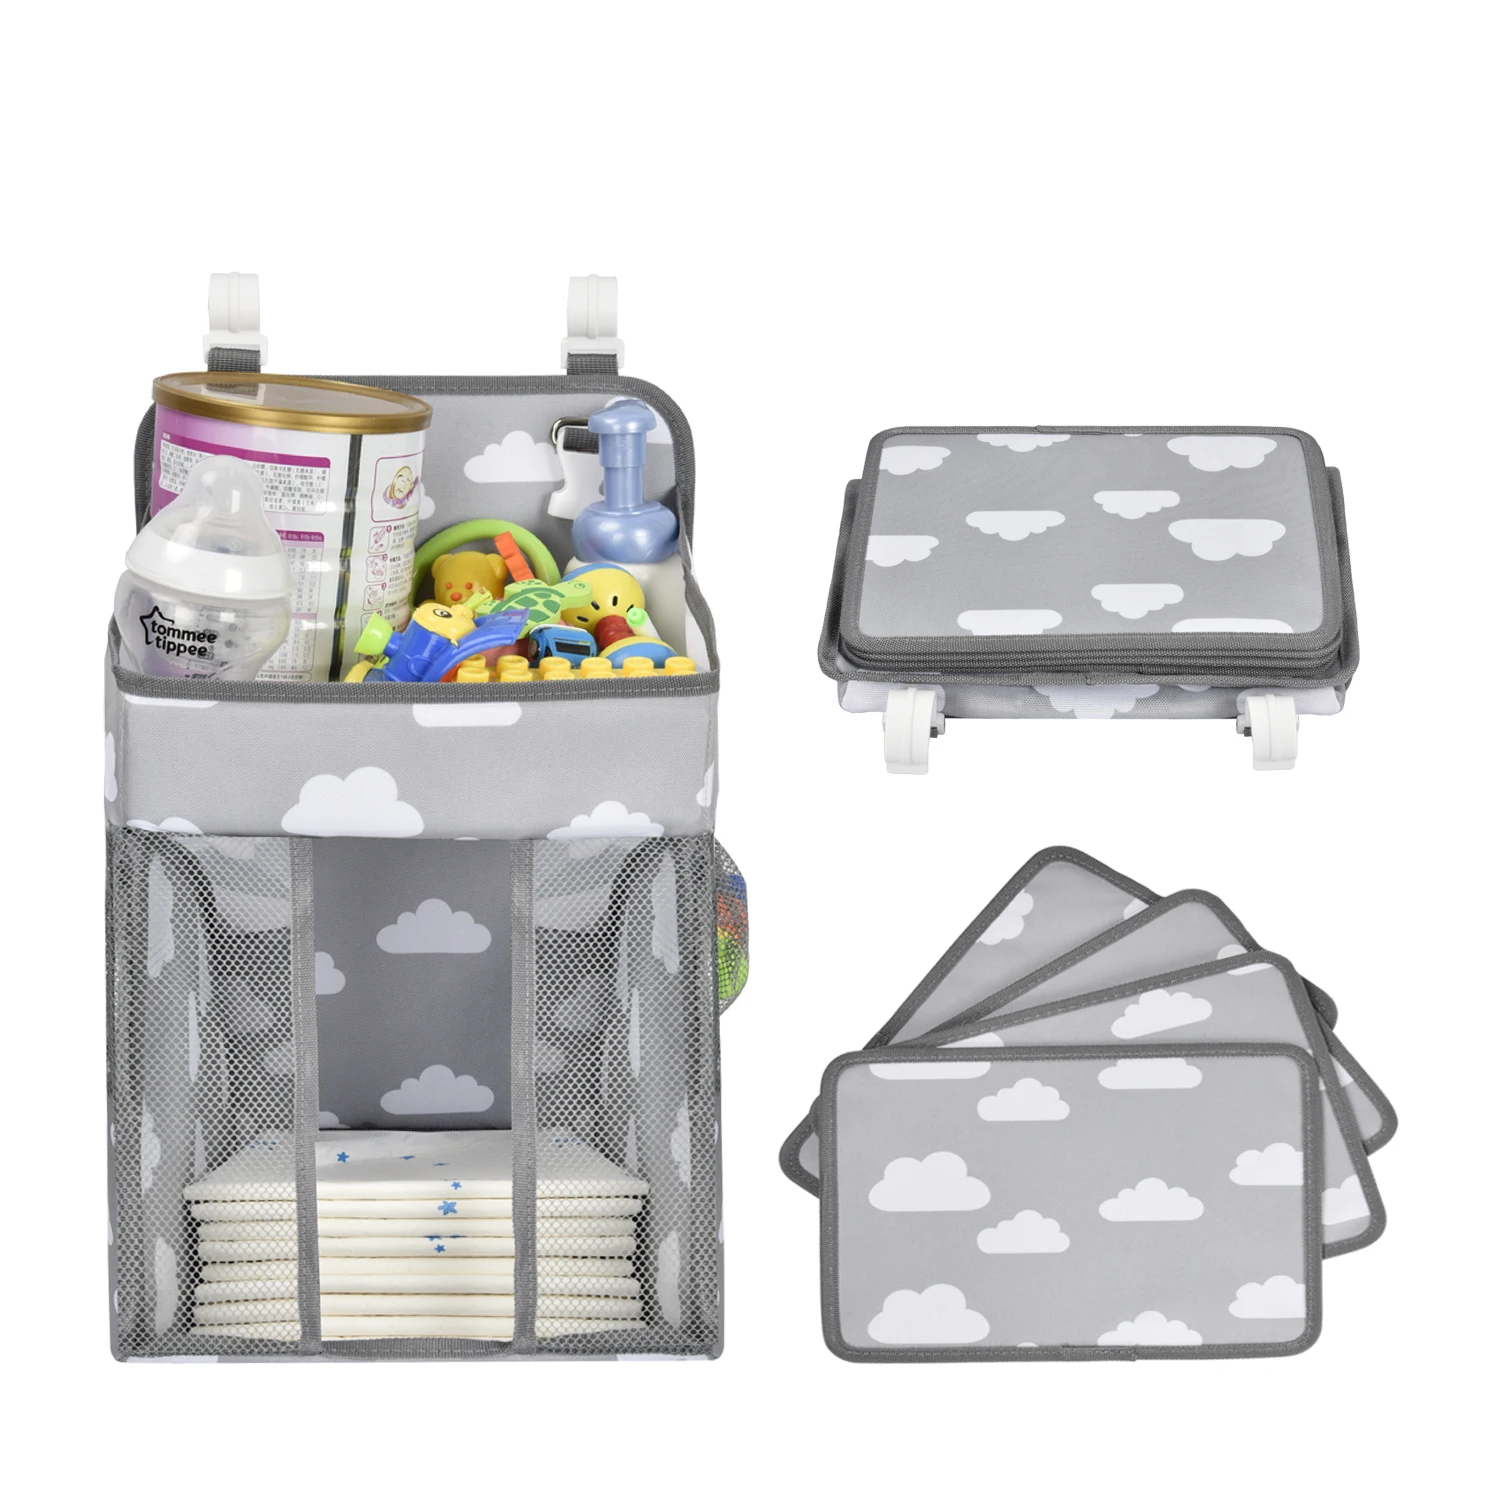 

2020 Stock Baby Nursery Organizer Hanging Diaper Caddy Hanging Changing Diaper Stacker Storage, White and grey or customized